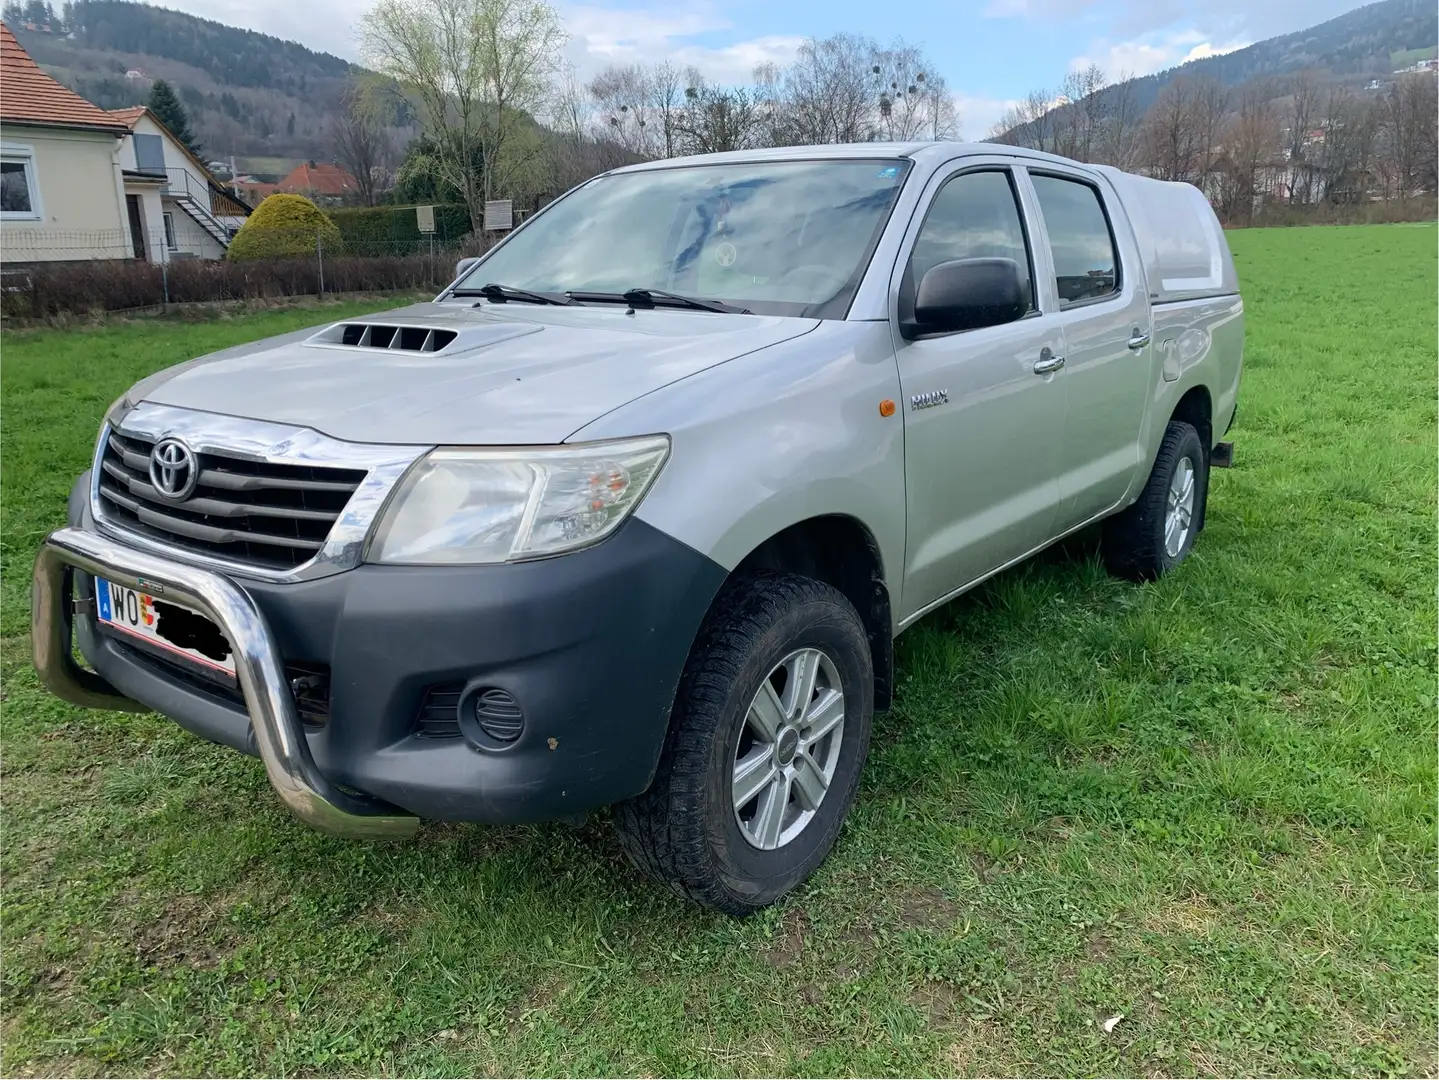 Toyota Hilux 2.5l 4x4 Country Grey - 1